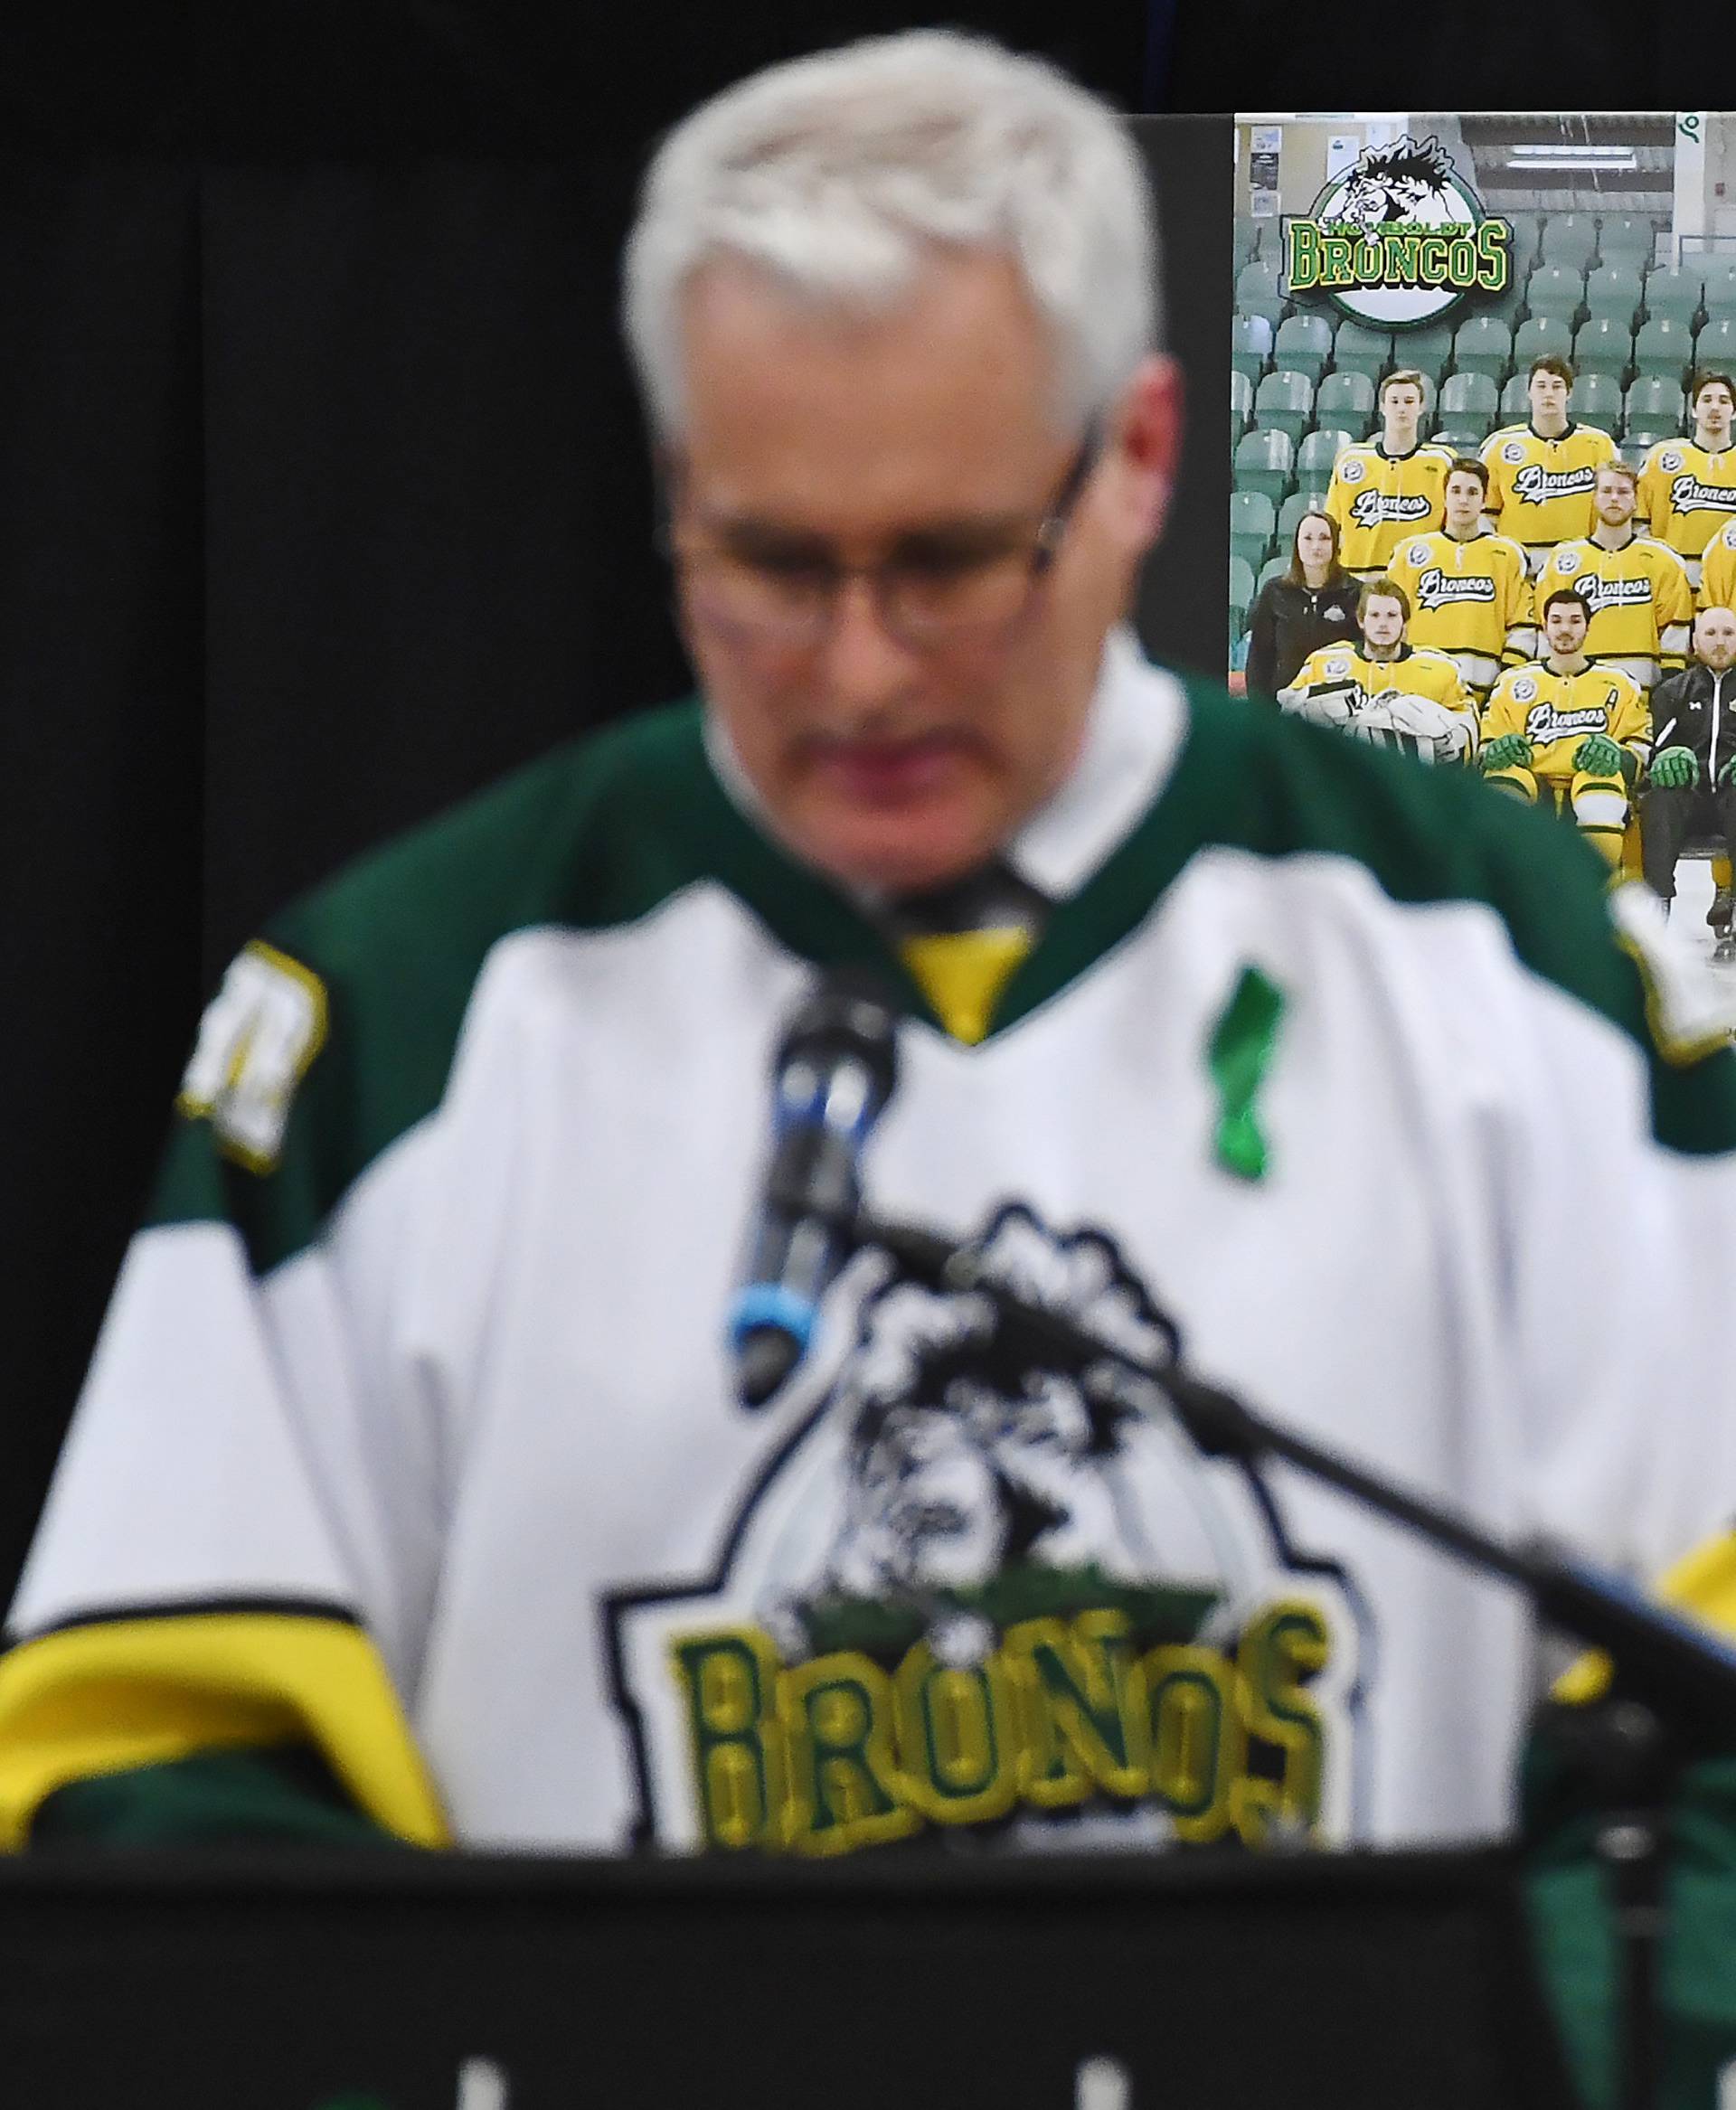 Humboldt Mayor Rob Muench speaks on stage during a vigil at the Elgar Petersen Arena, home of the Humboldt Broncos, to honour the victims of a fatal bus accident in Humboldt